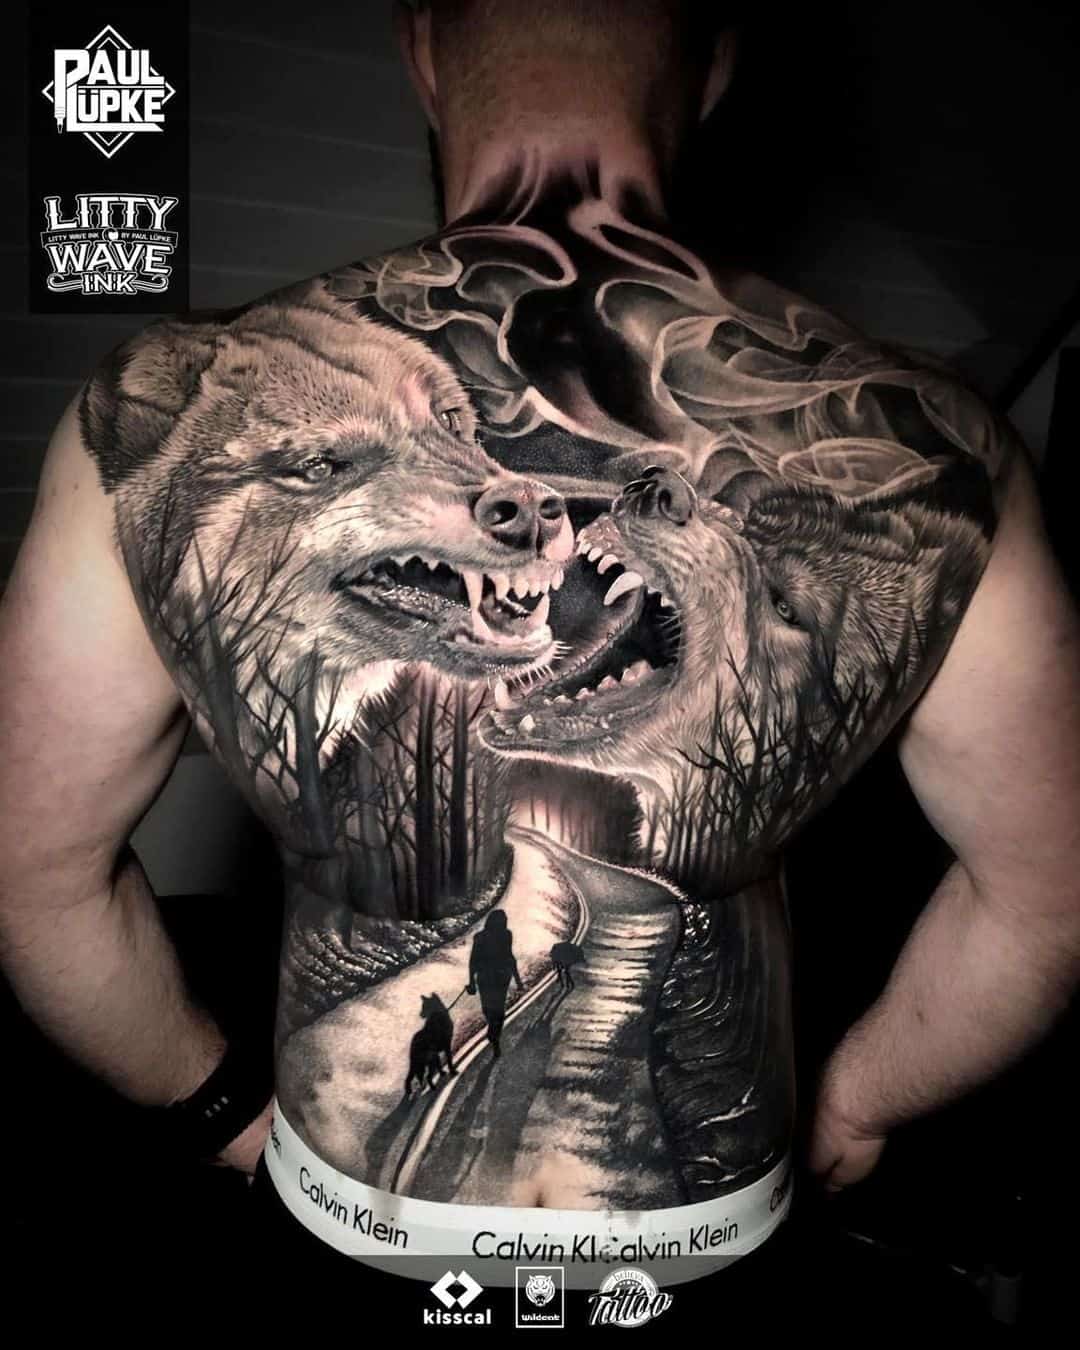 30 Awesome Wolf Tattoo Ideas for Men & Women in 2023